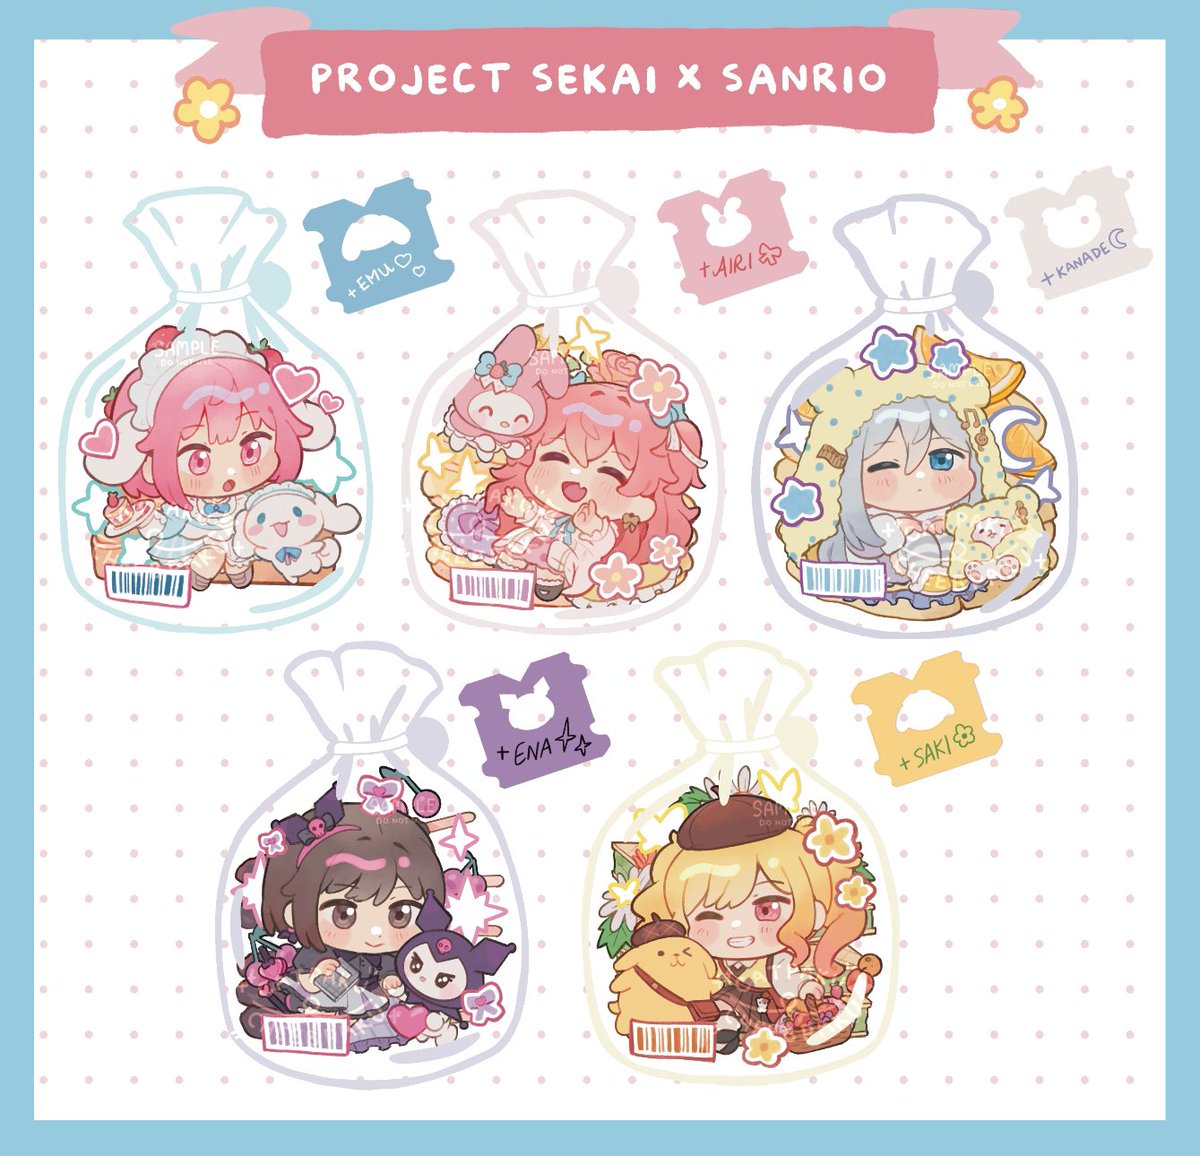 Prsk sanrio snack baggies! Which will u bring home 🥺